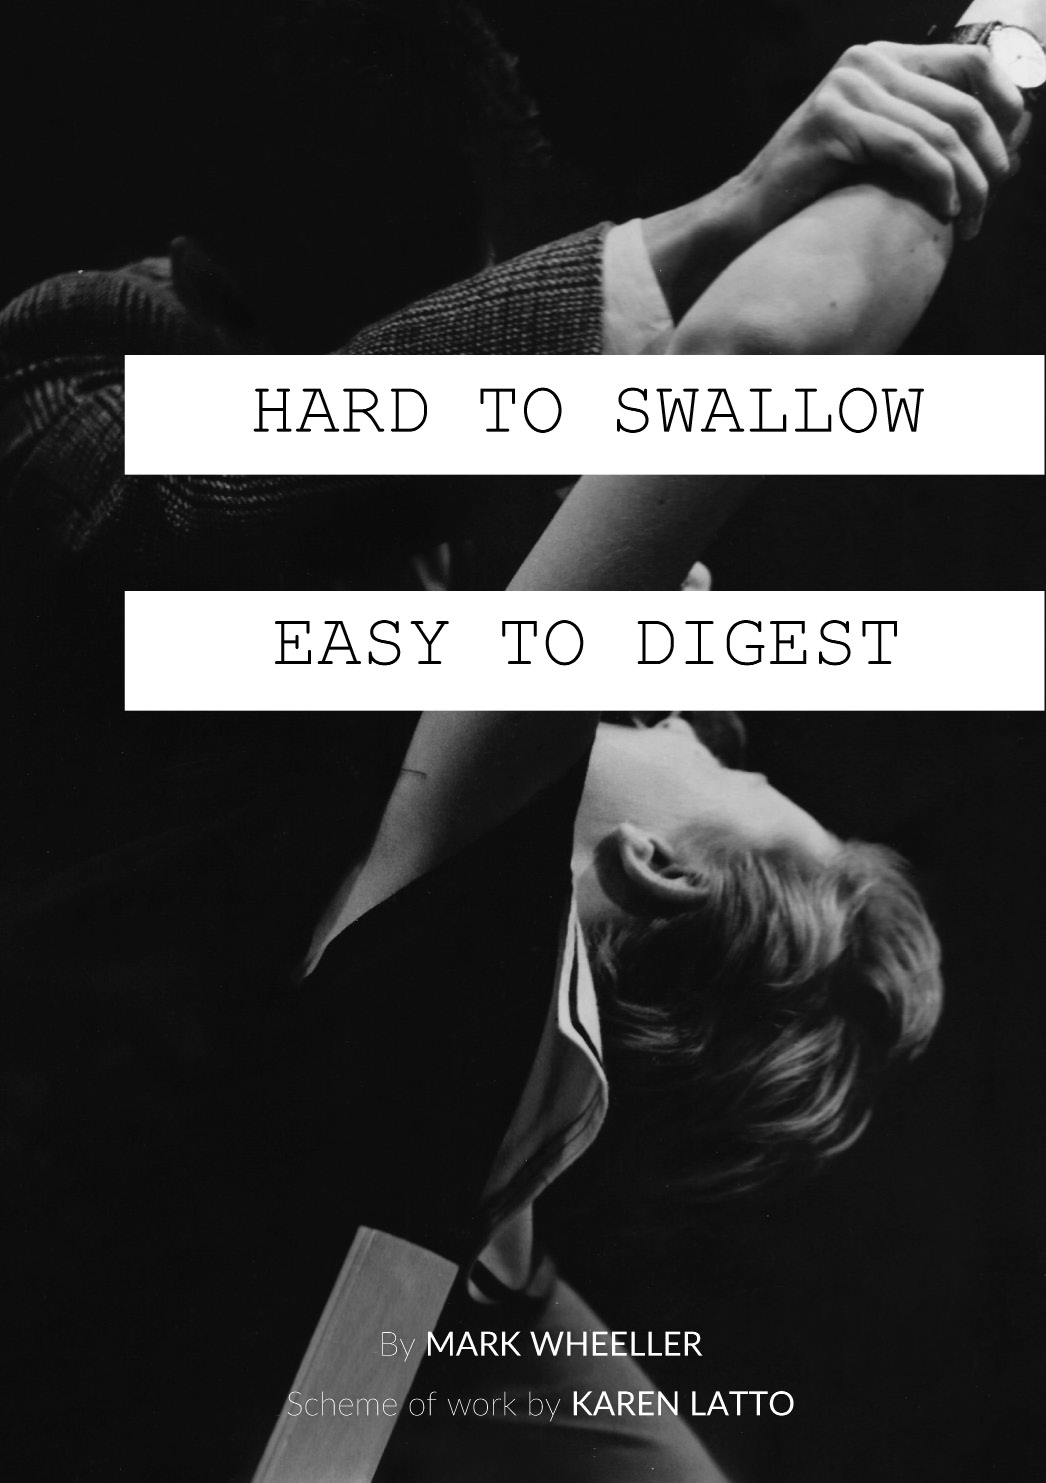 BOOK REVIEW: HARD TO SWALLOW – EASY TO DIGEST